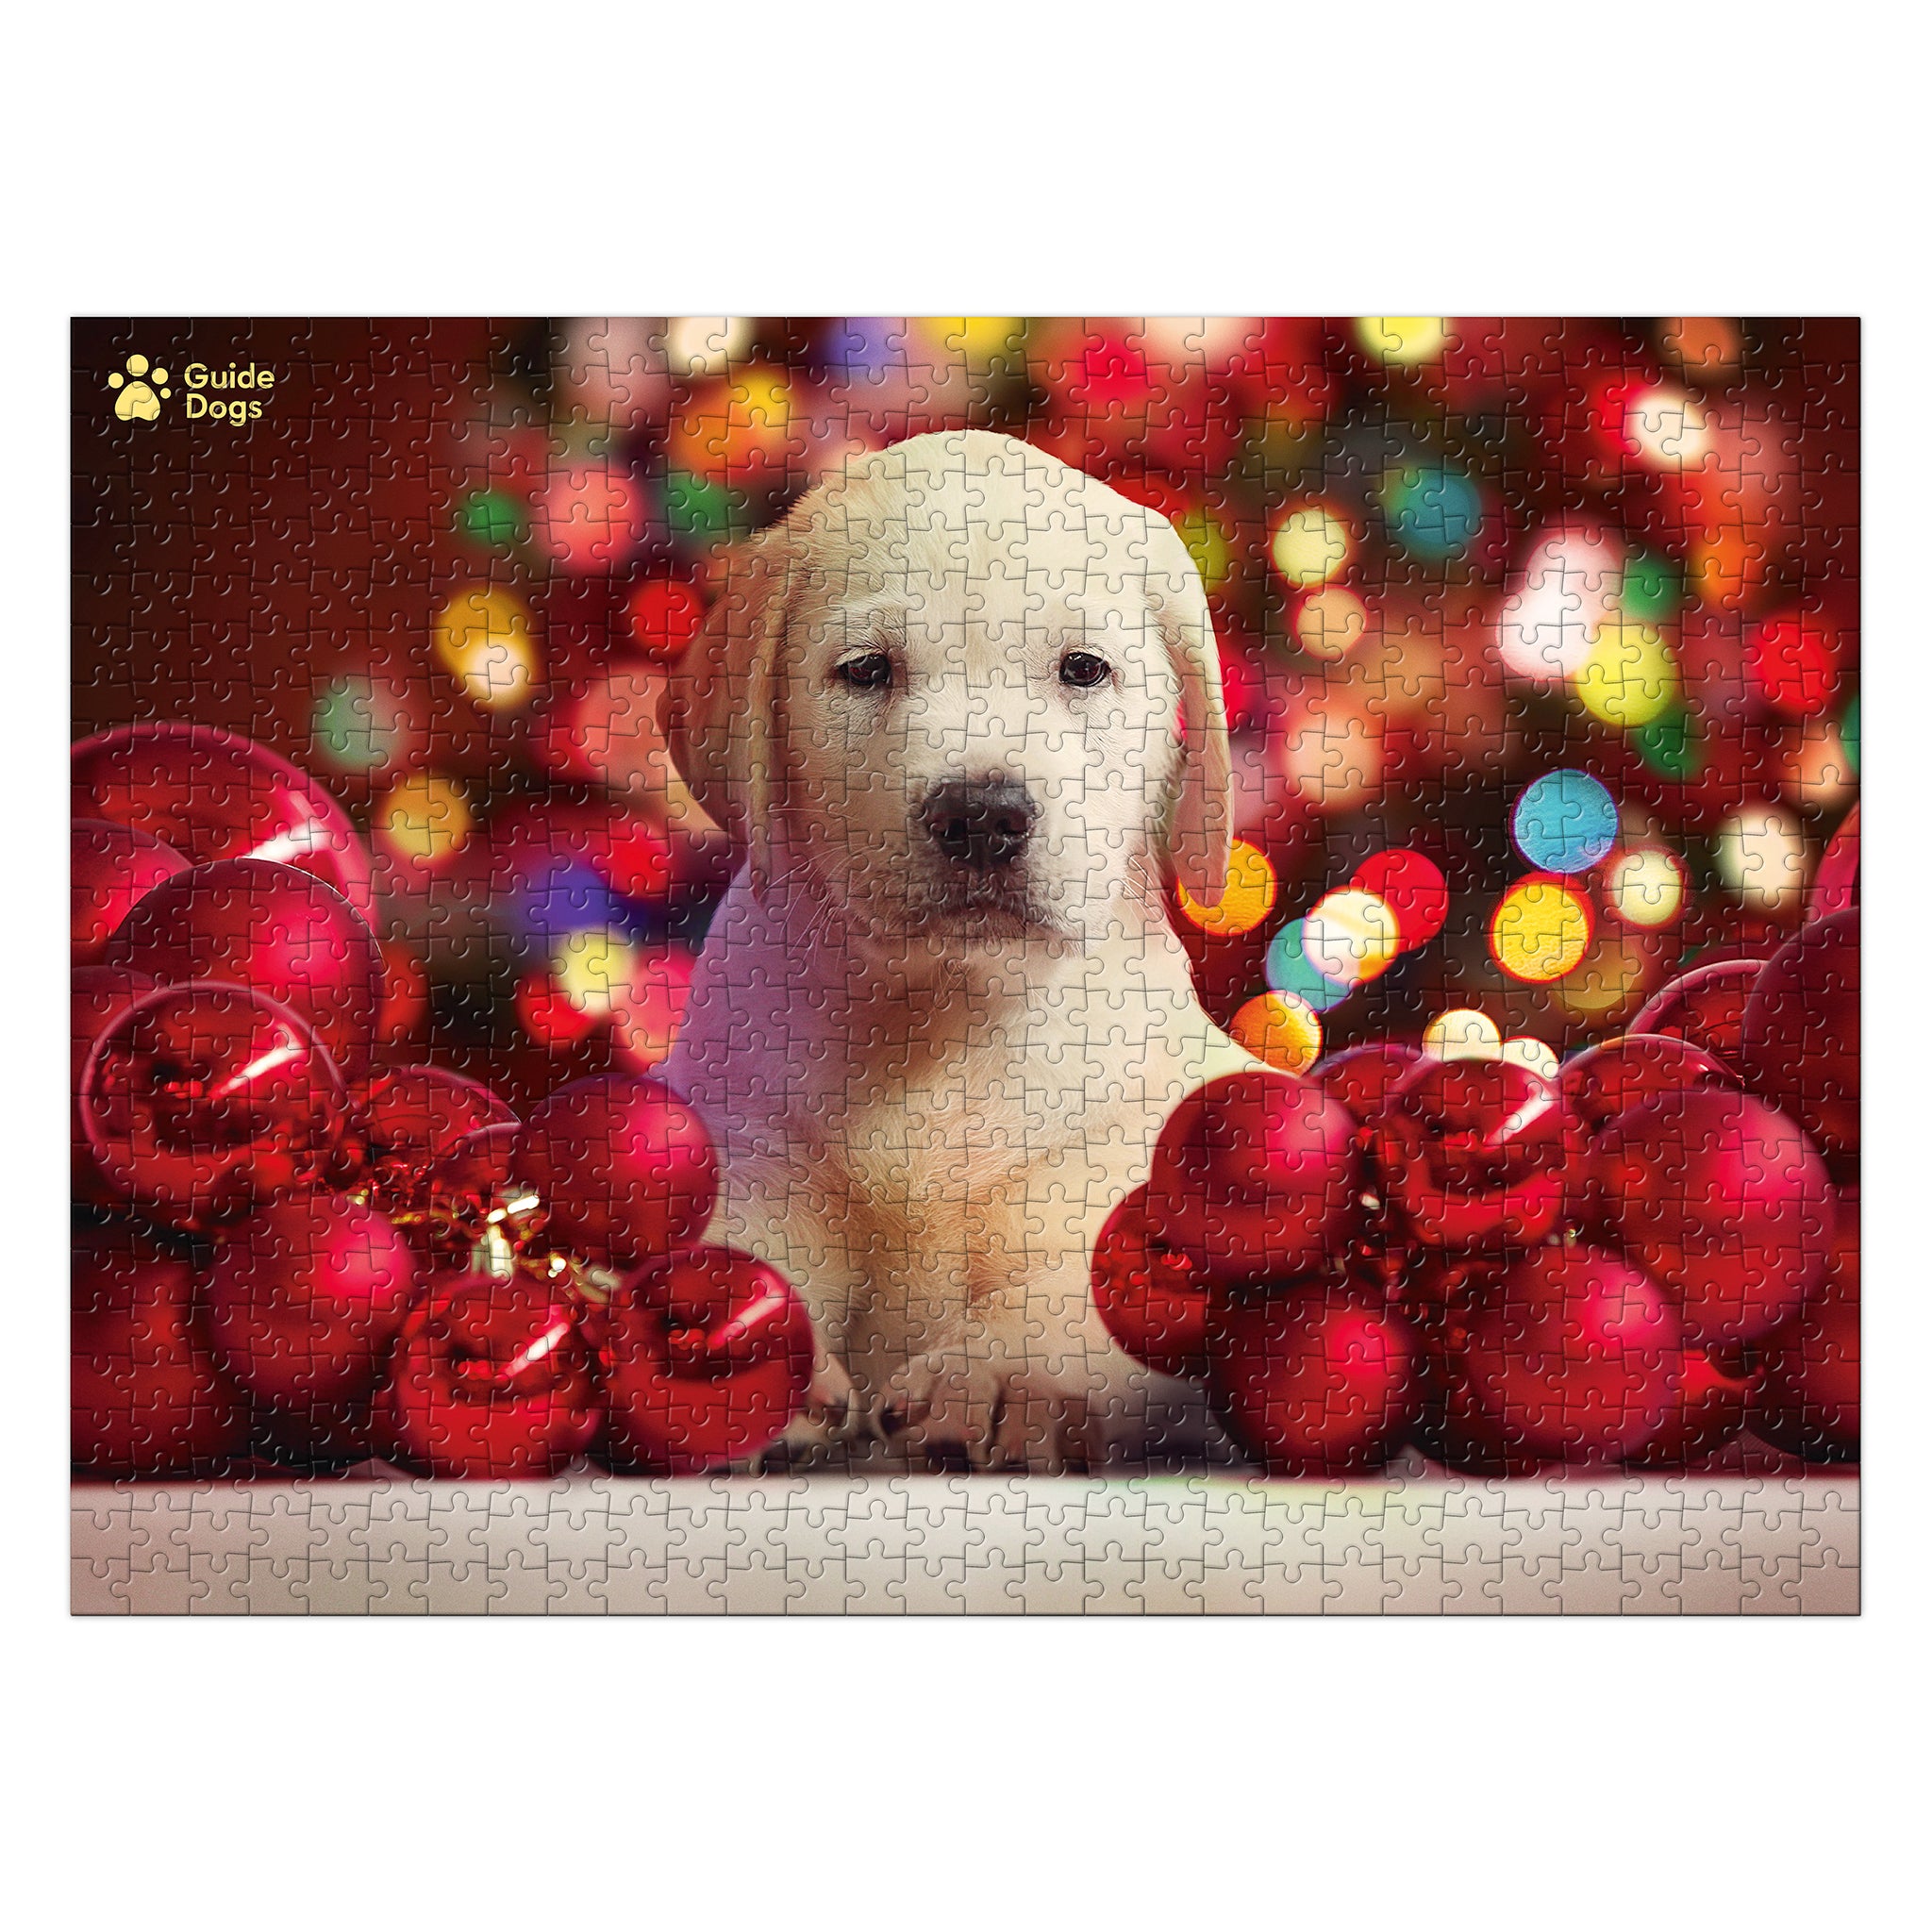 An image of the completed Guide Dogs Christmas Jigsaw showing the image on the jigsaw, a Yellow Labrador Puppy surrounded by red baubles and festive lights behind. 